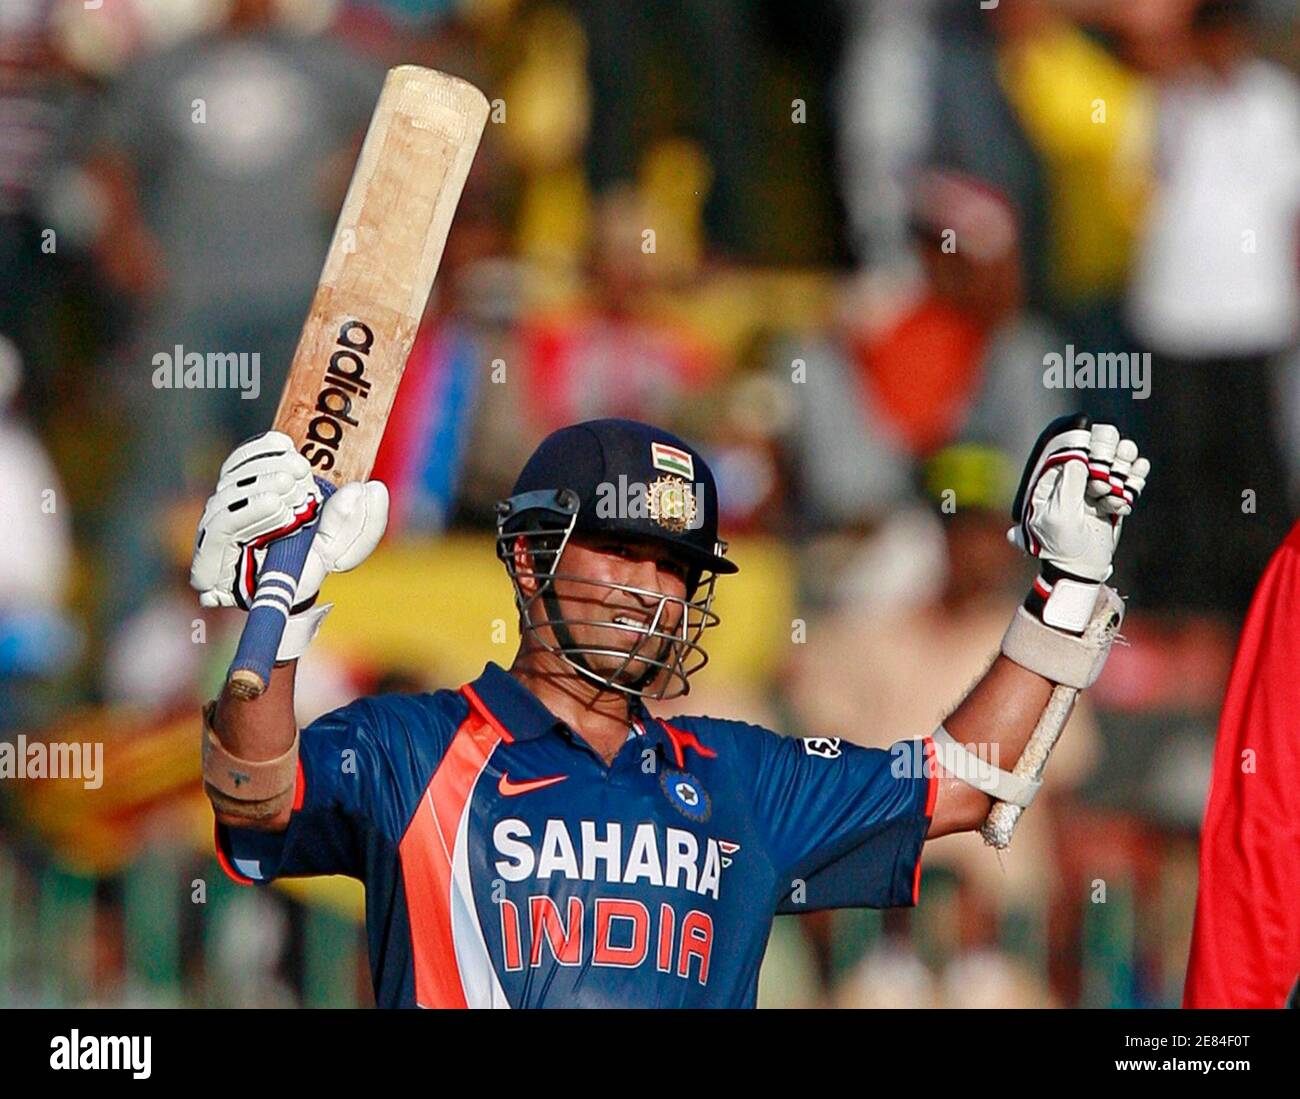 India's Sachin Tendulkar raises his bat up as he celebrates scoring a  century (100 runs) during the finals of the tri-nations one-day  international cricket series against Sri Lanka in Colombo September 14,